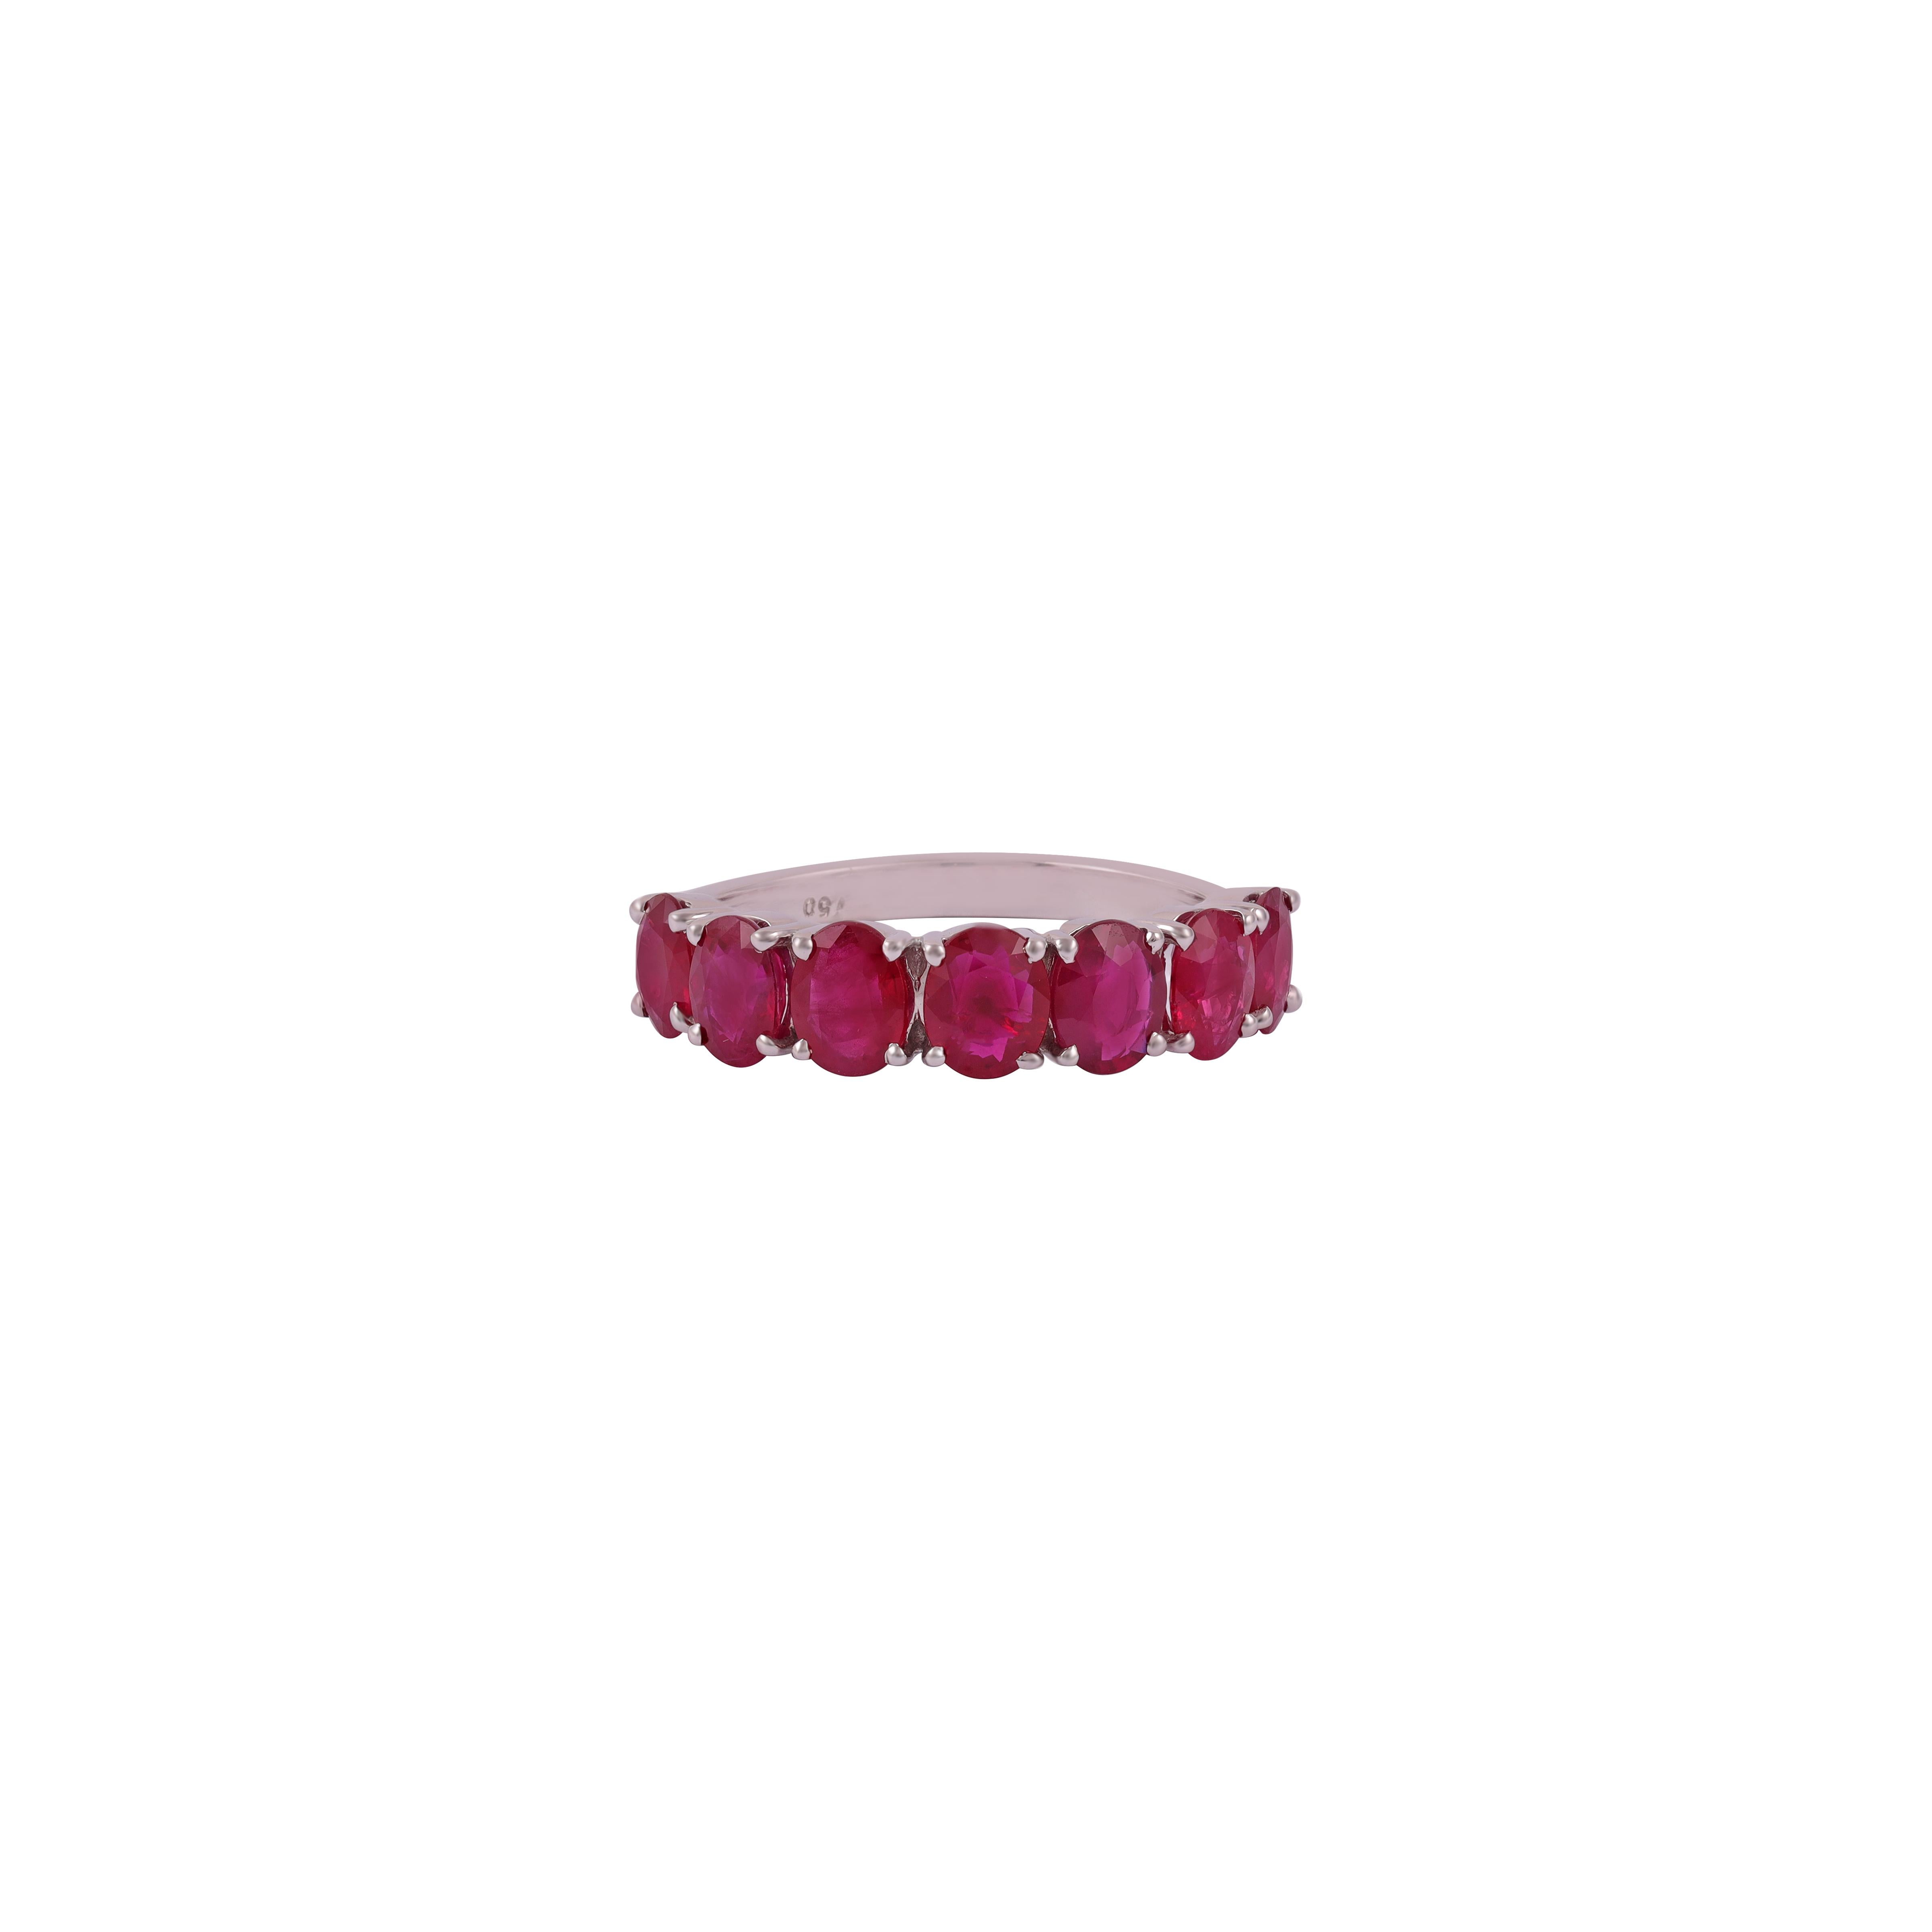 Handcrafted Round Ruby Half  Band
7 Oval Ruby - 2.55 Cts
18 Karat Rose Gold - 3.00 Grams


Custom Services
Resizing is available.
Request Customization